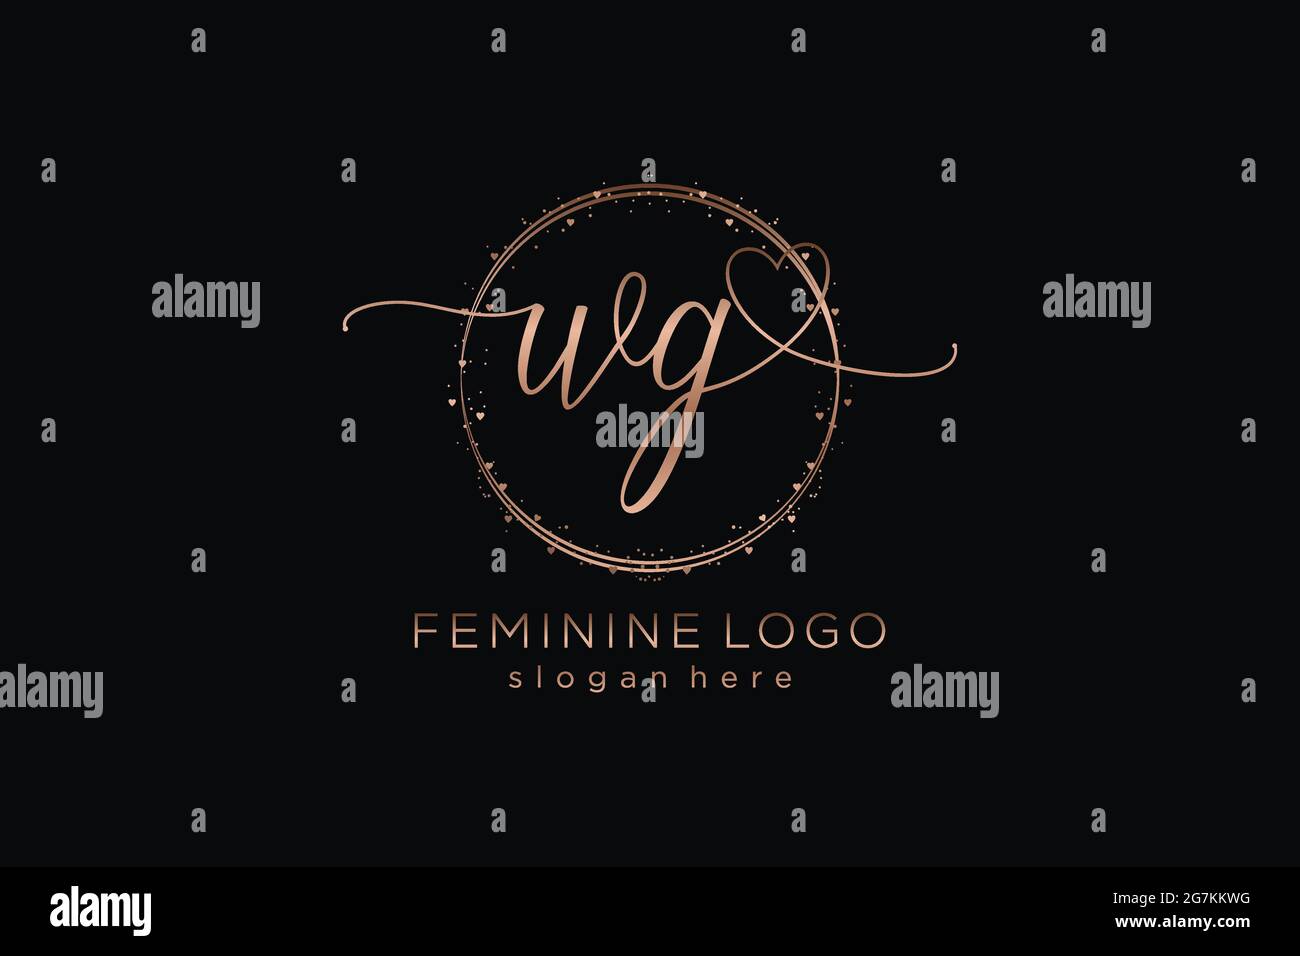 WG handwriting logo with circle template vector logo of initial wedding, fashion, floral and botanical with creative template. Stock Vector